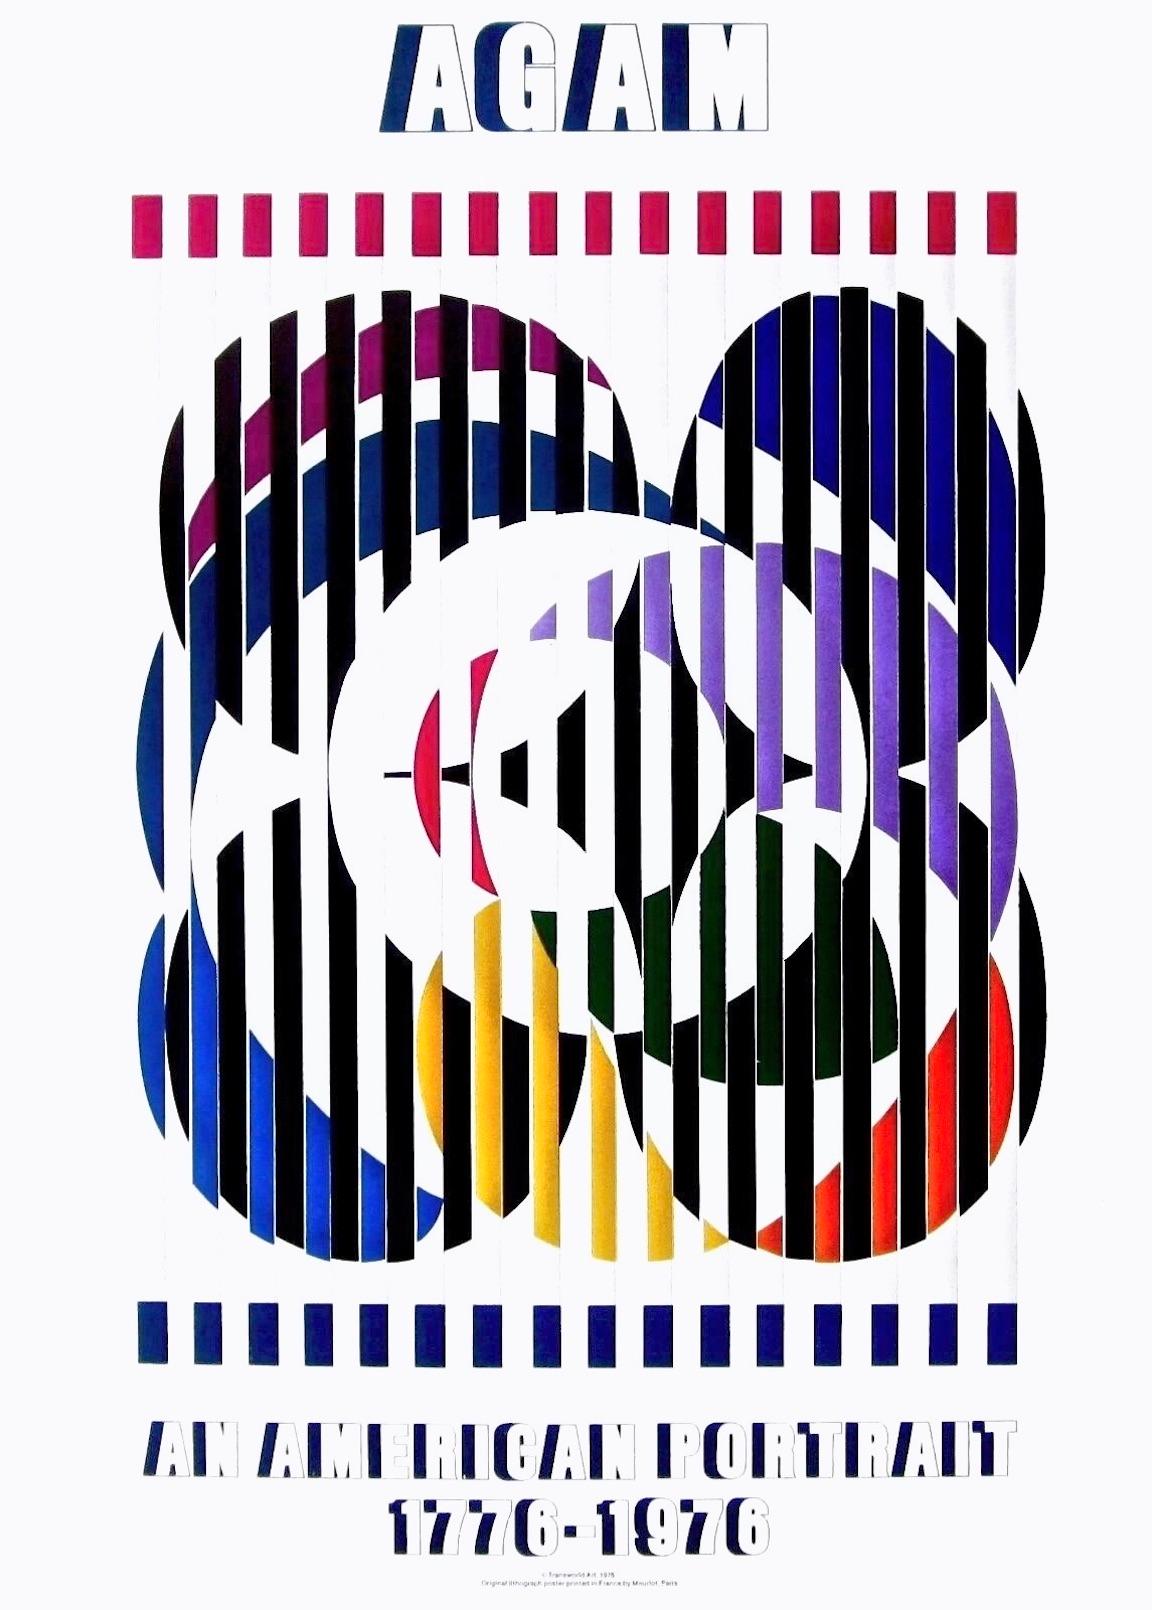 Artist: AFter Yaakov Agam (1928)
Title: An American Portrait, exhibition poster
Year: 1976
Medium: Offset Lithograph on wove paper
Size: 27.75 x 19.25 inches
Condition: Excellent
Notes: Published by Mourlot

YAACOV AGAM (1928- ) Yaacov Agam is one